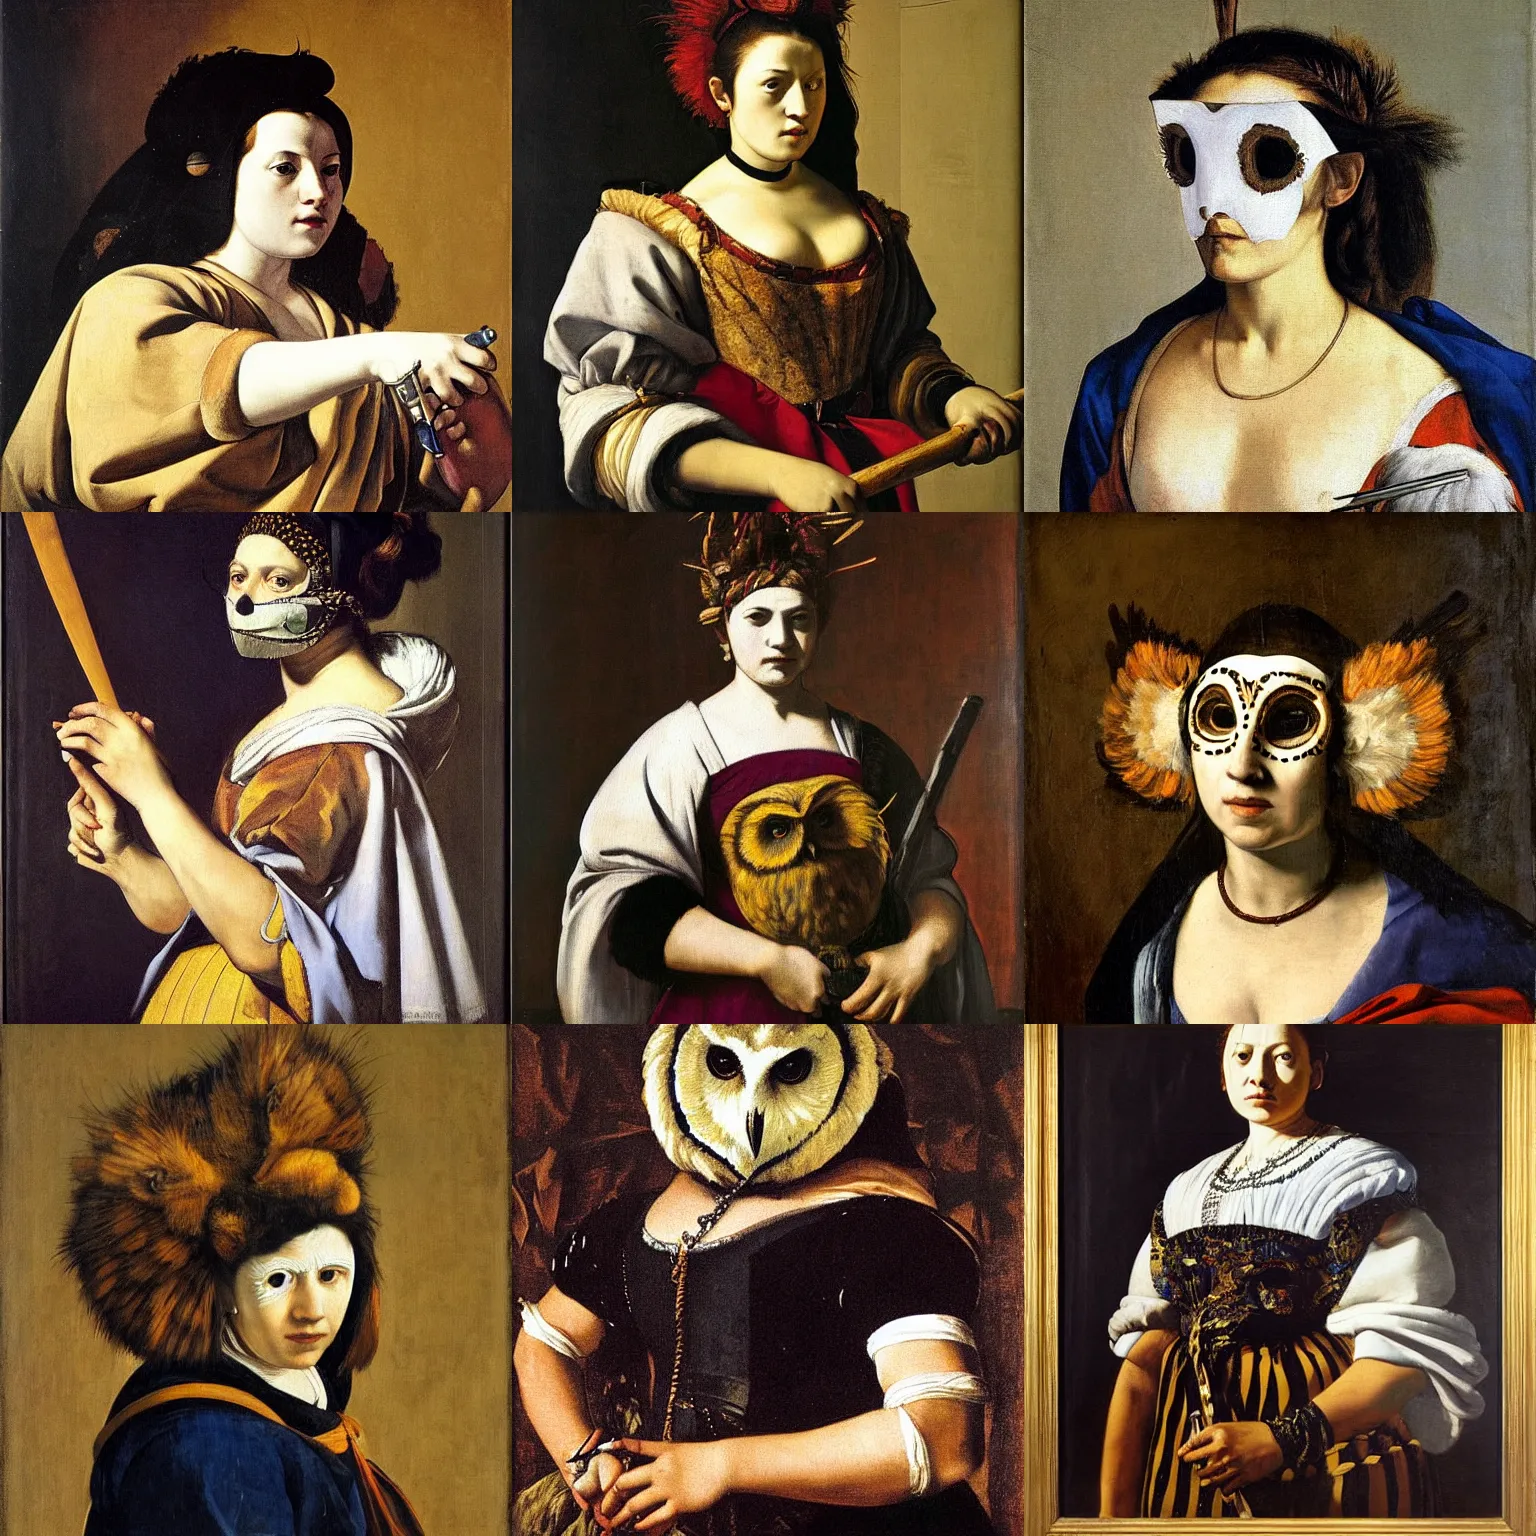 Prompt: by artemisia gentileschi. an hd portrait painting of a woman in an owl mask. she is wearing a jacket, and is brandishing a weapon menacingly.